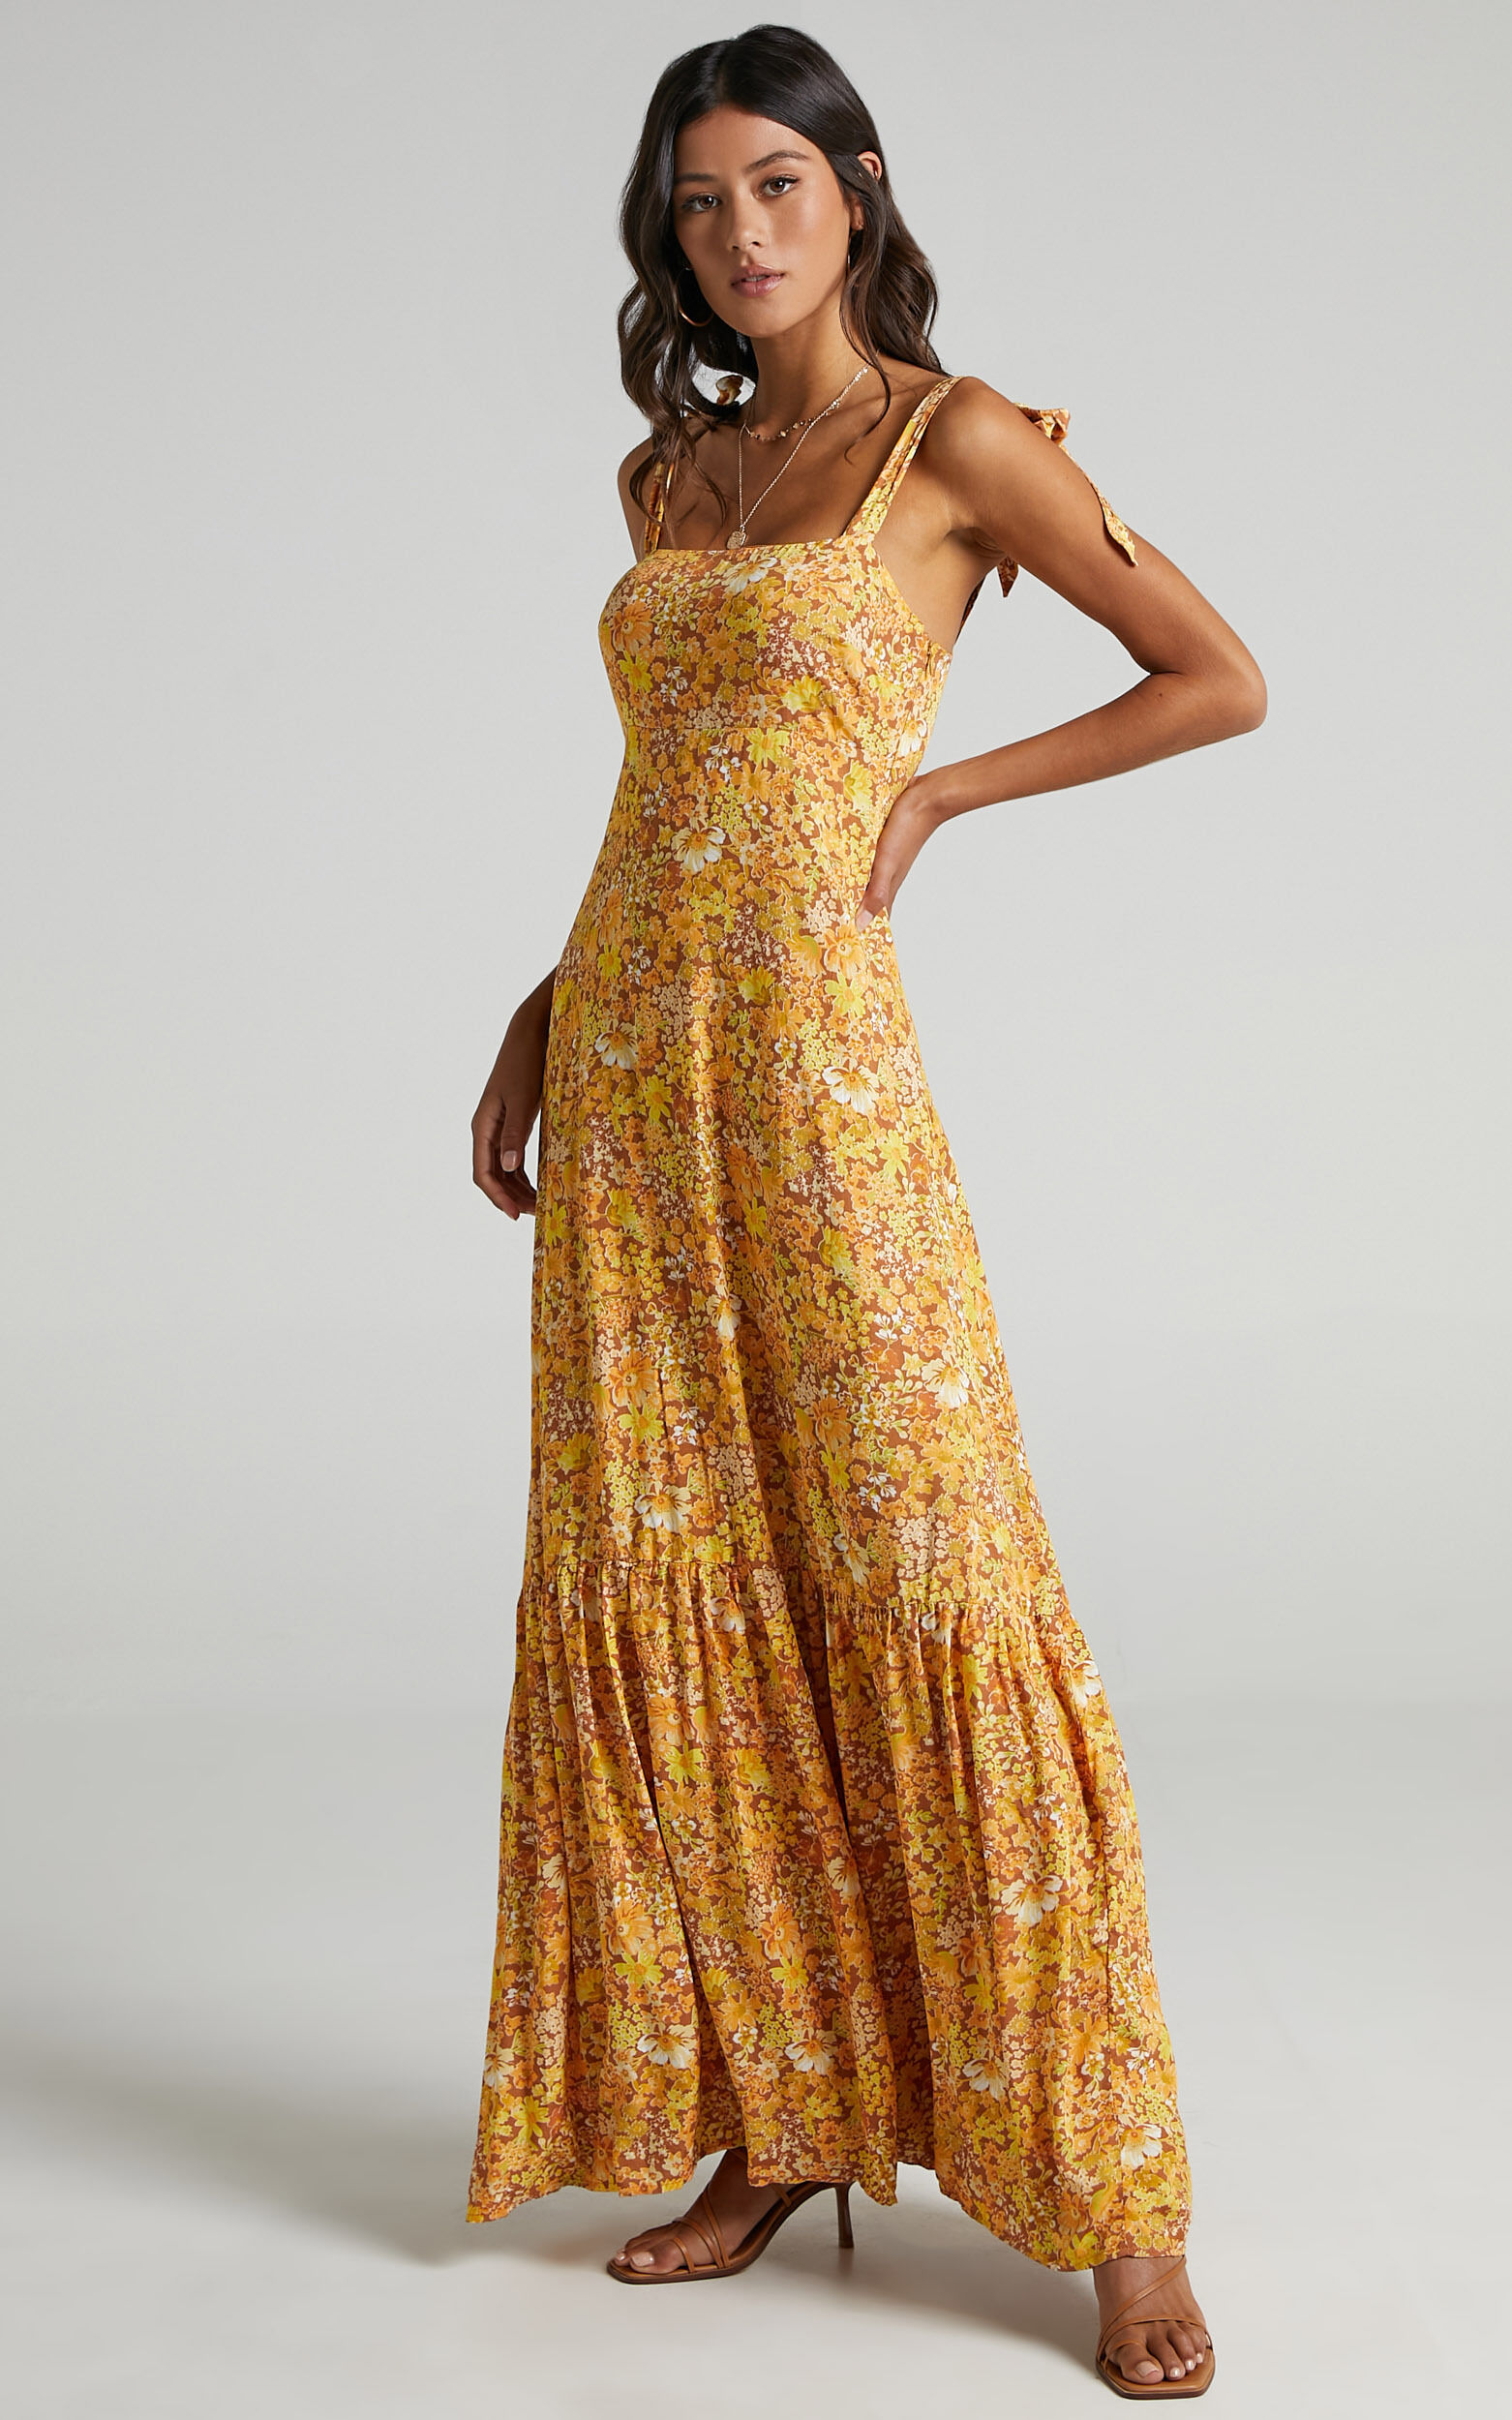 Honor Dress in Rustic Floral - 6 (XS), Mustard, super-hi-res image number null